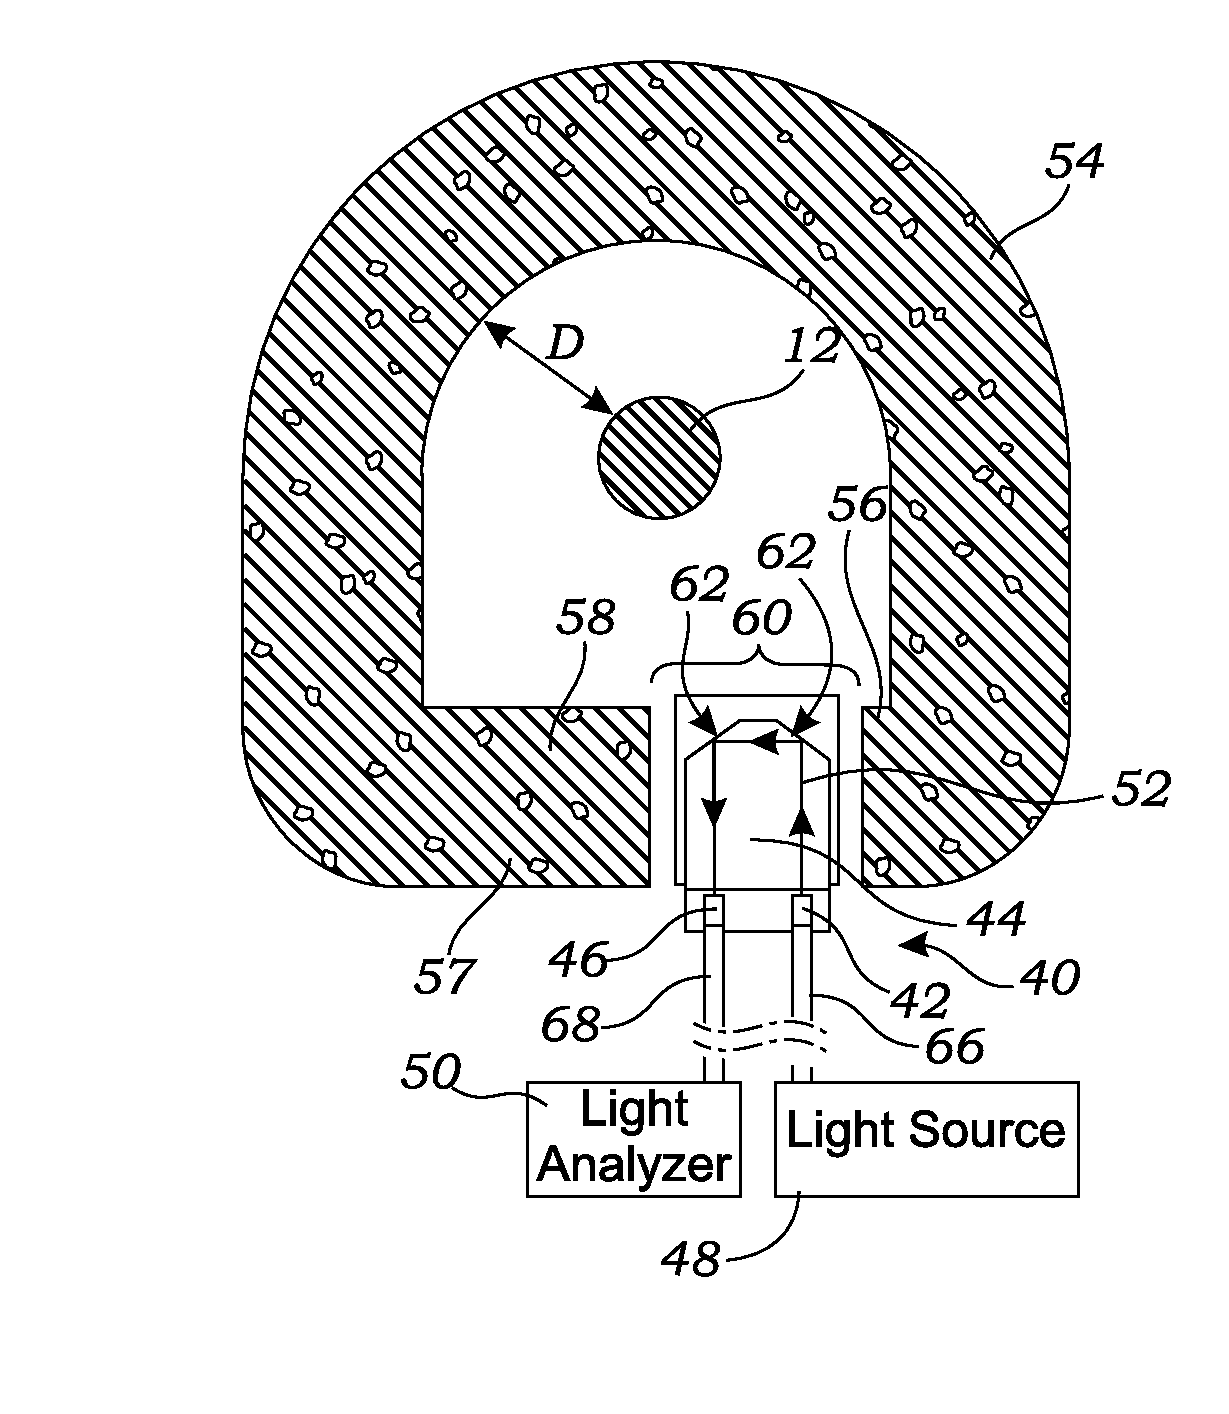 Optical sensor assembly for installation on a current carrying cable